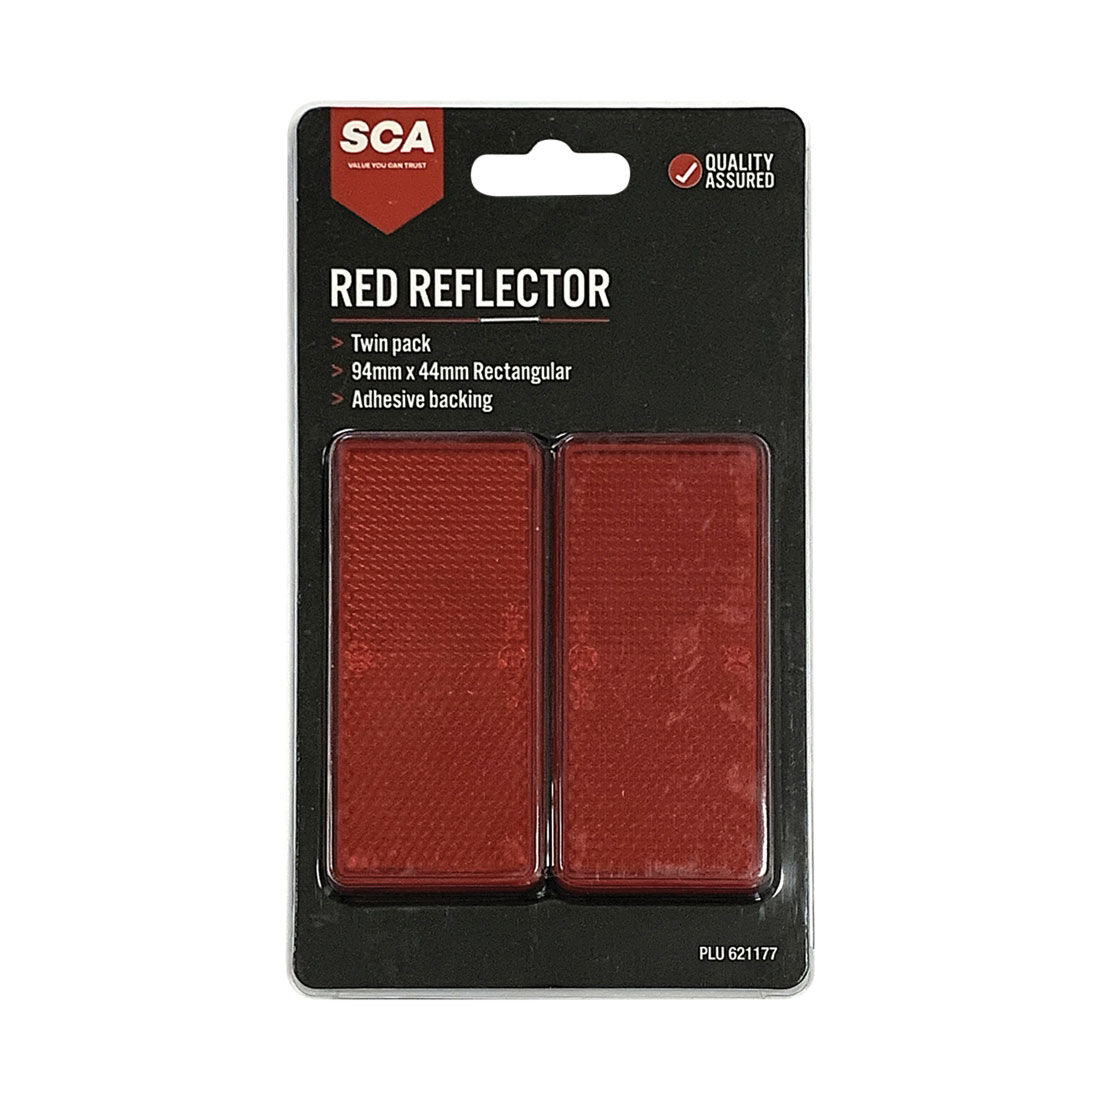 REAR RED ROUND STICK ON SELF ADHESIVE REFLECTOR 60mm CAR